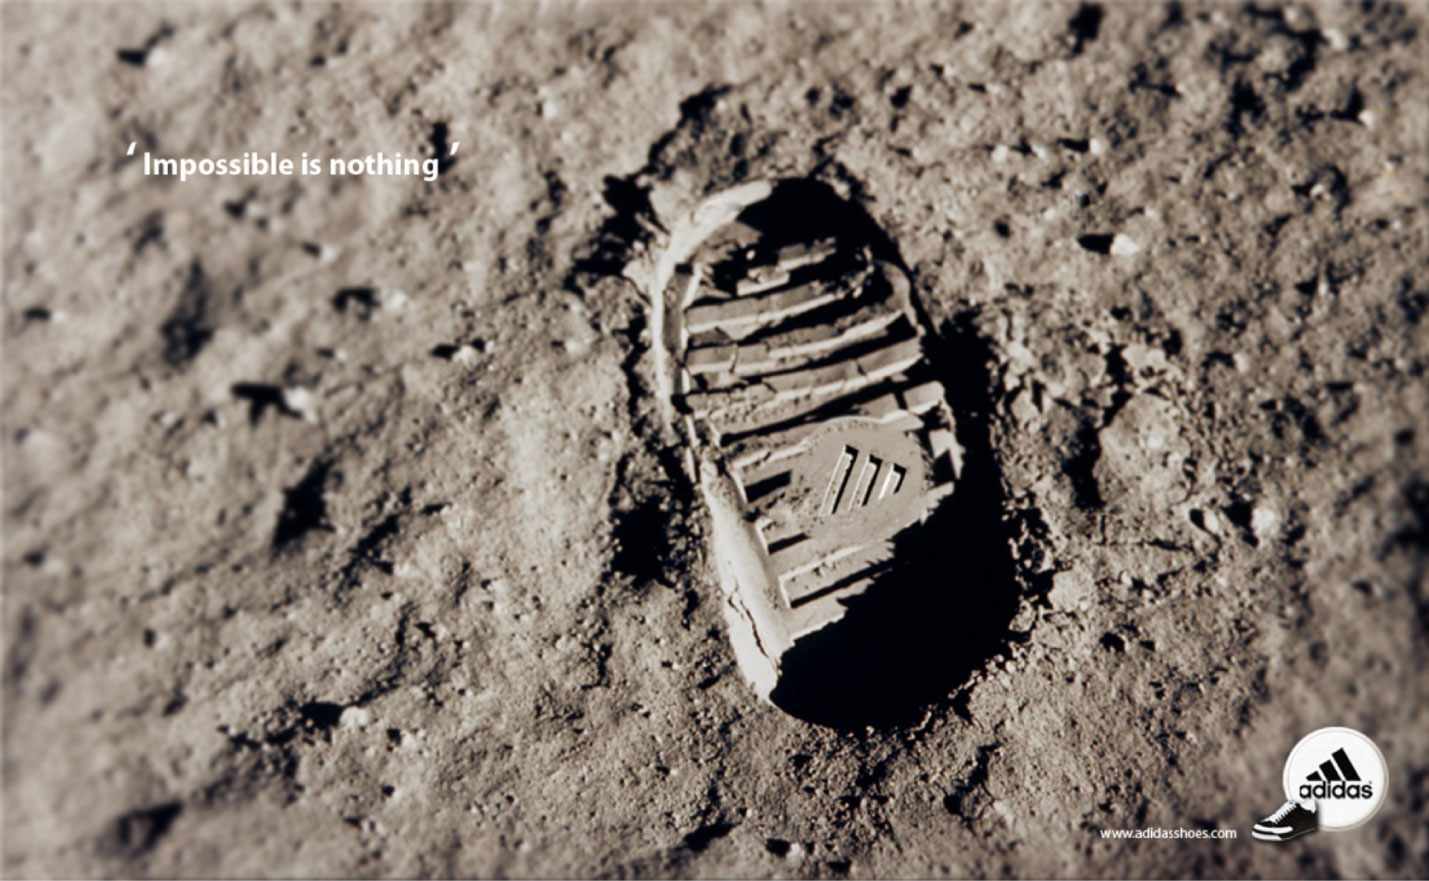 adidas-impossible-is-nothing-slogan